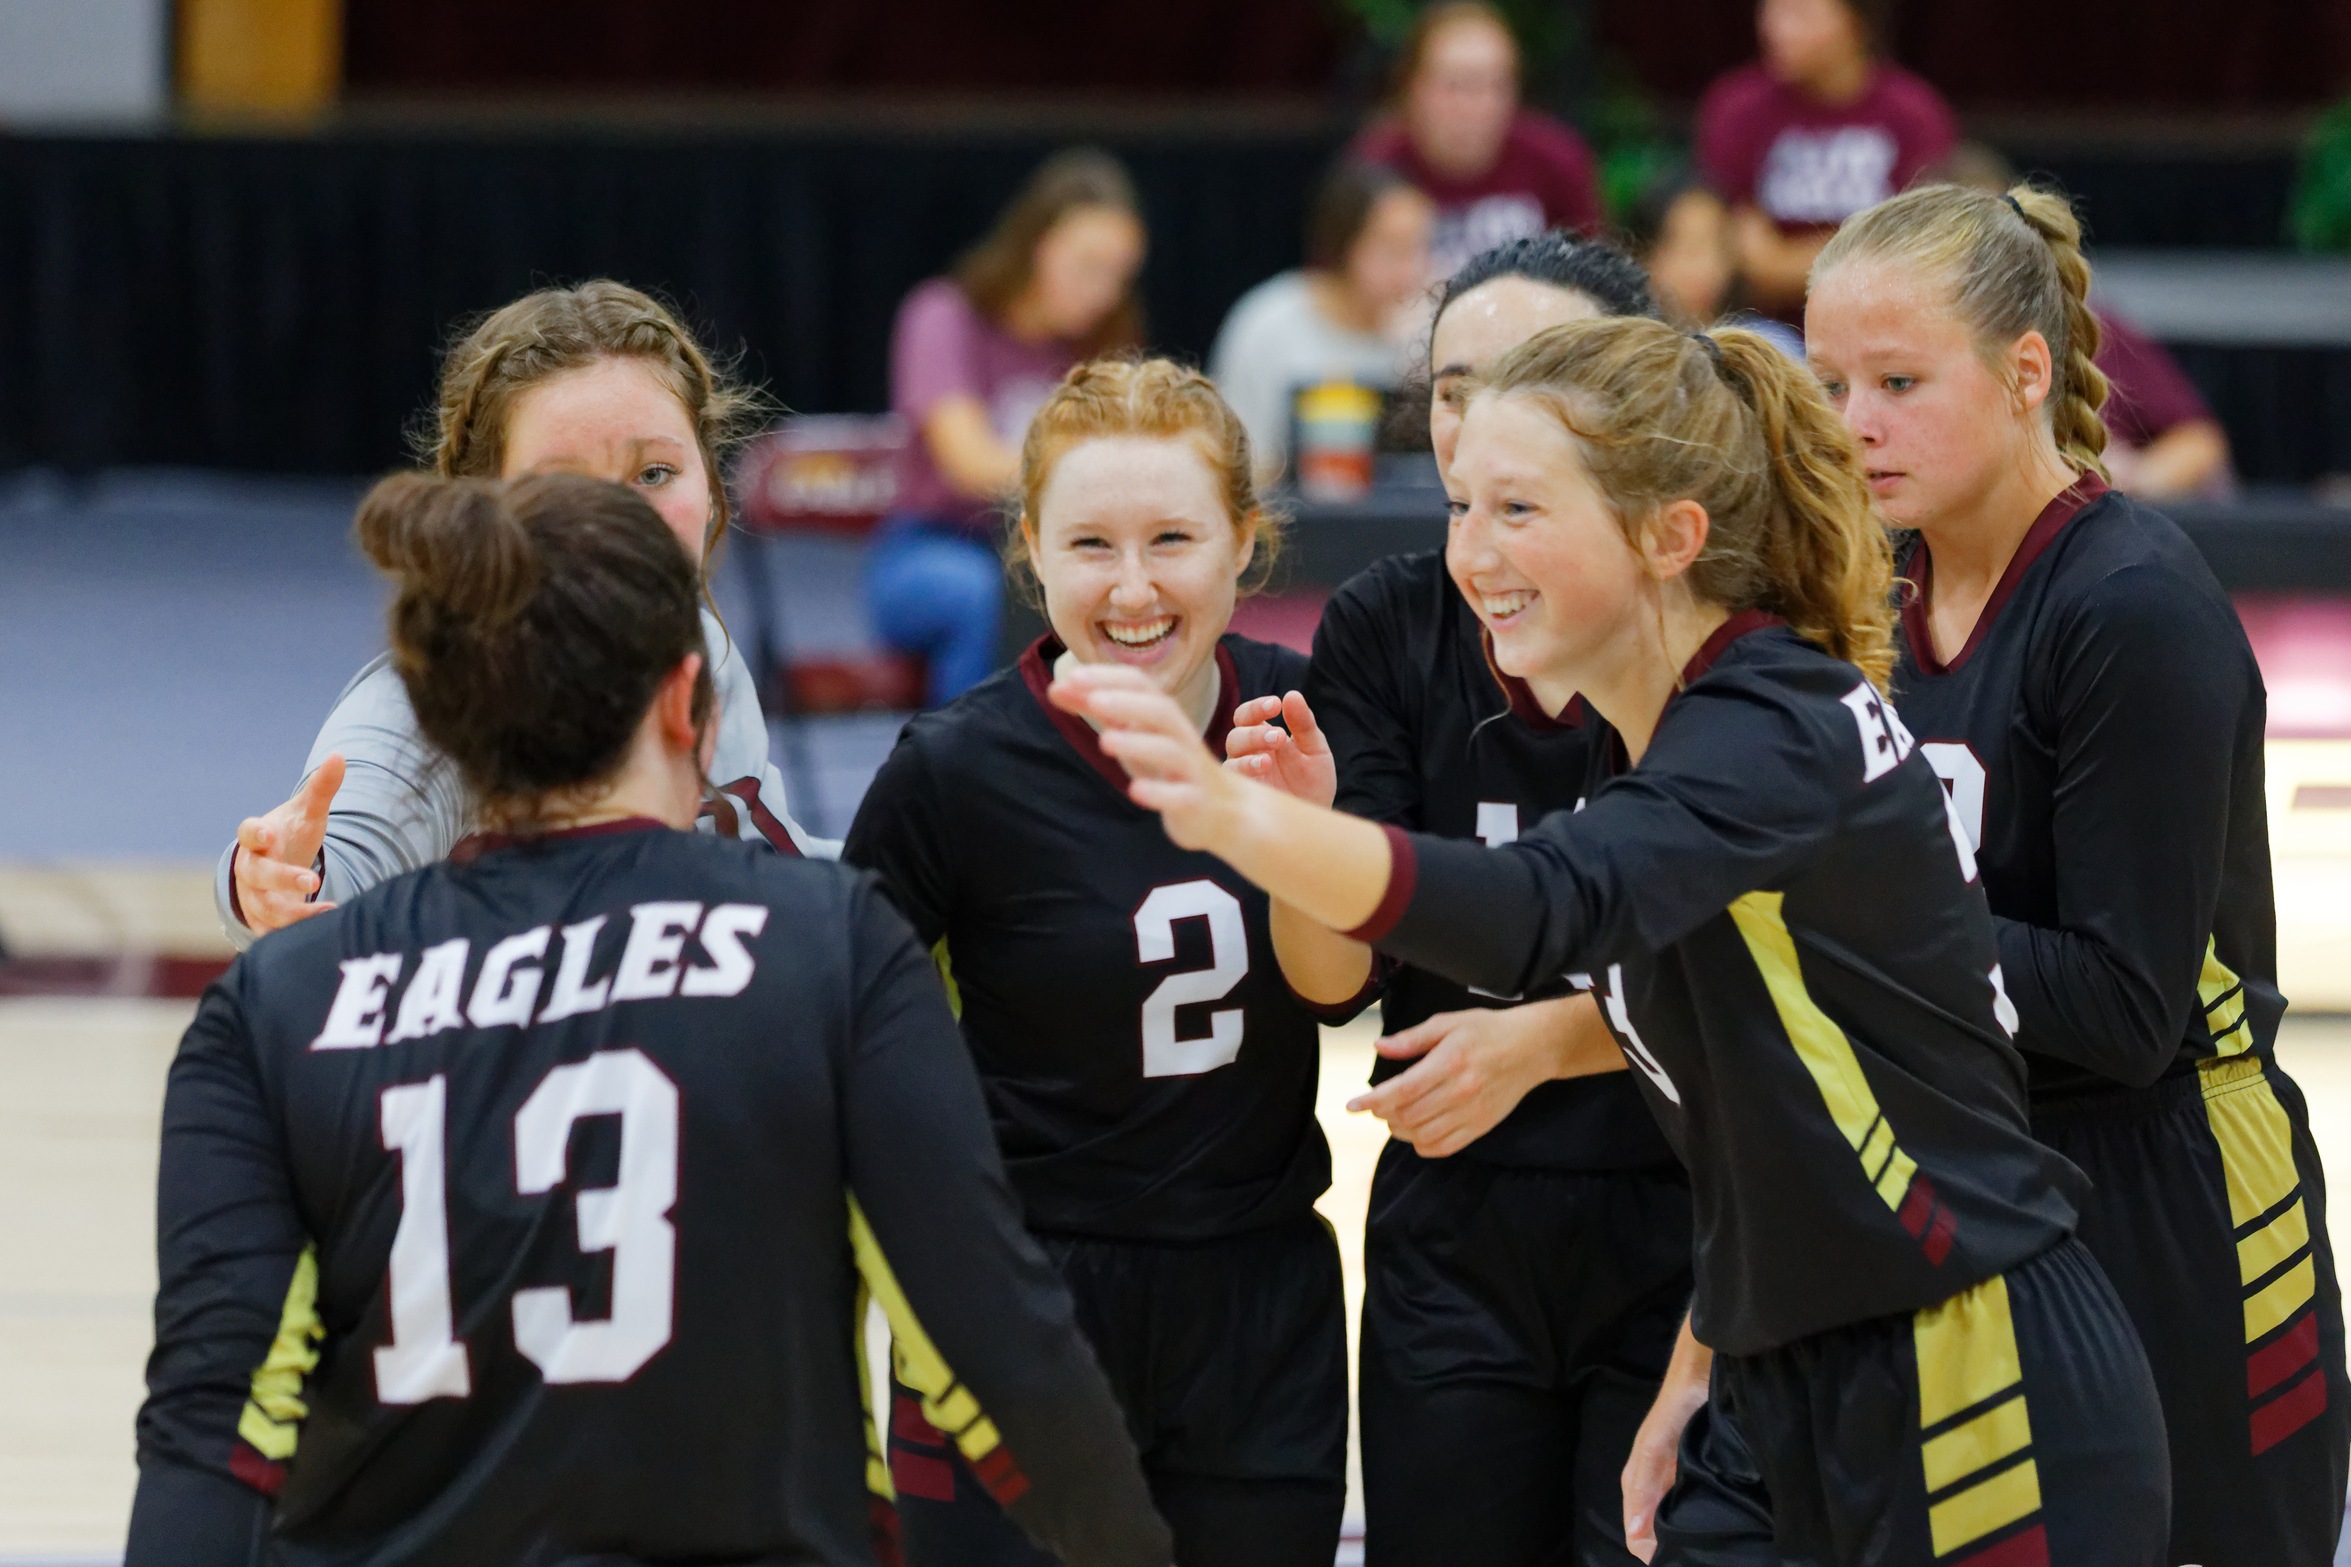 Women's Volleyball Season Preview